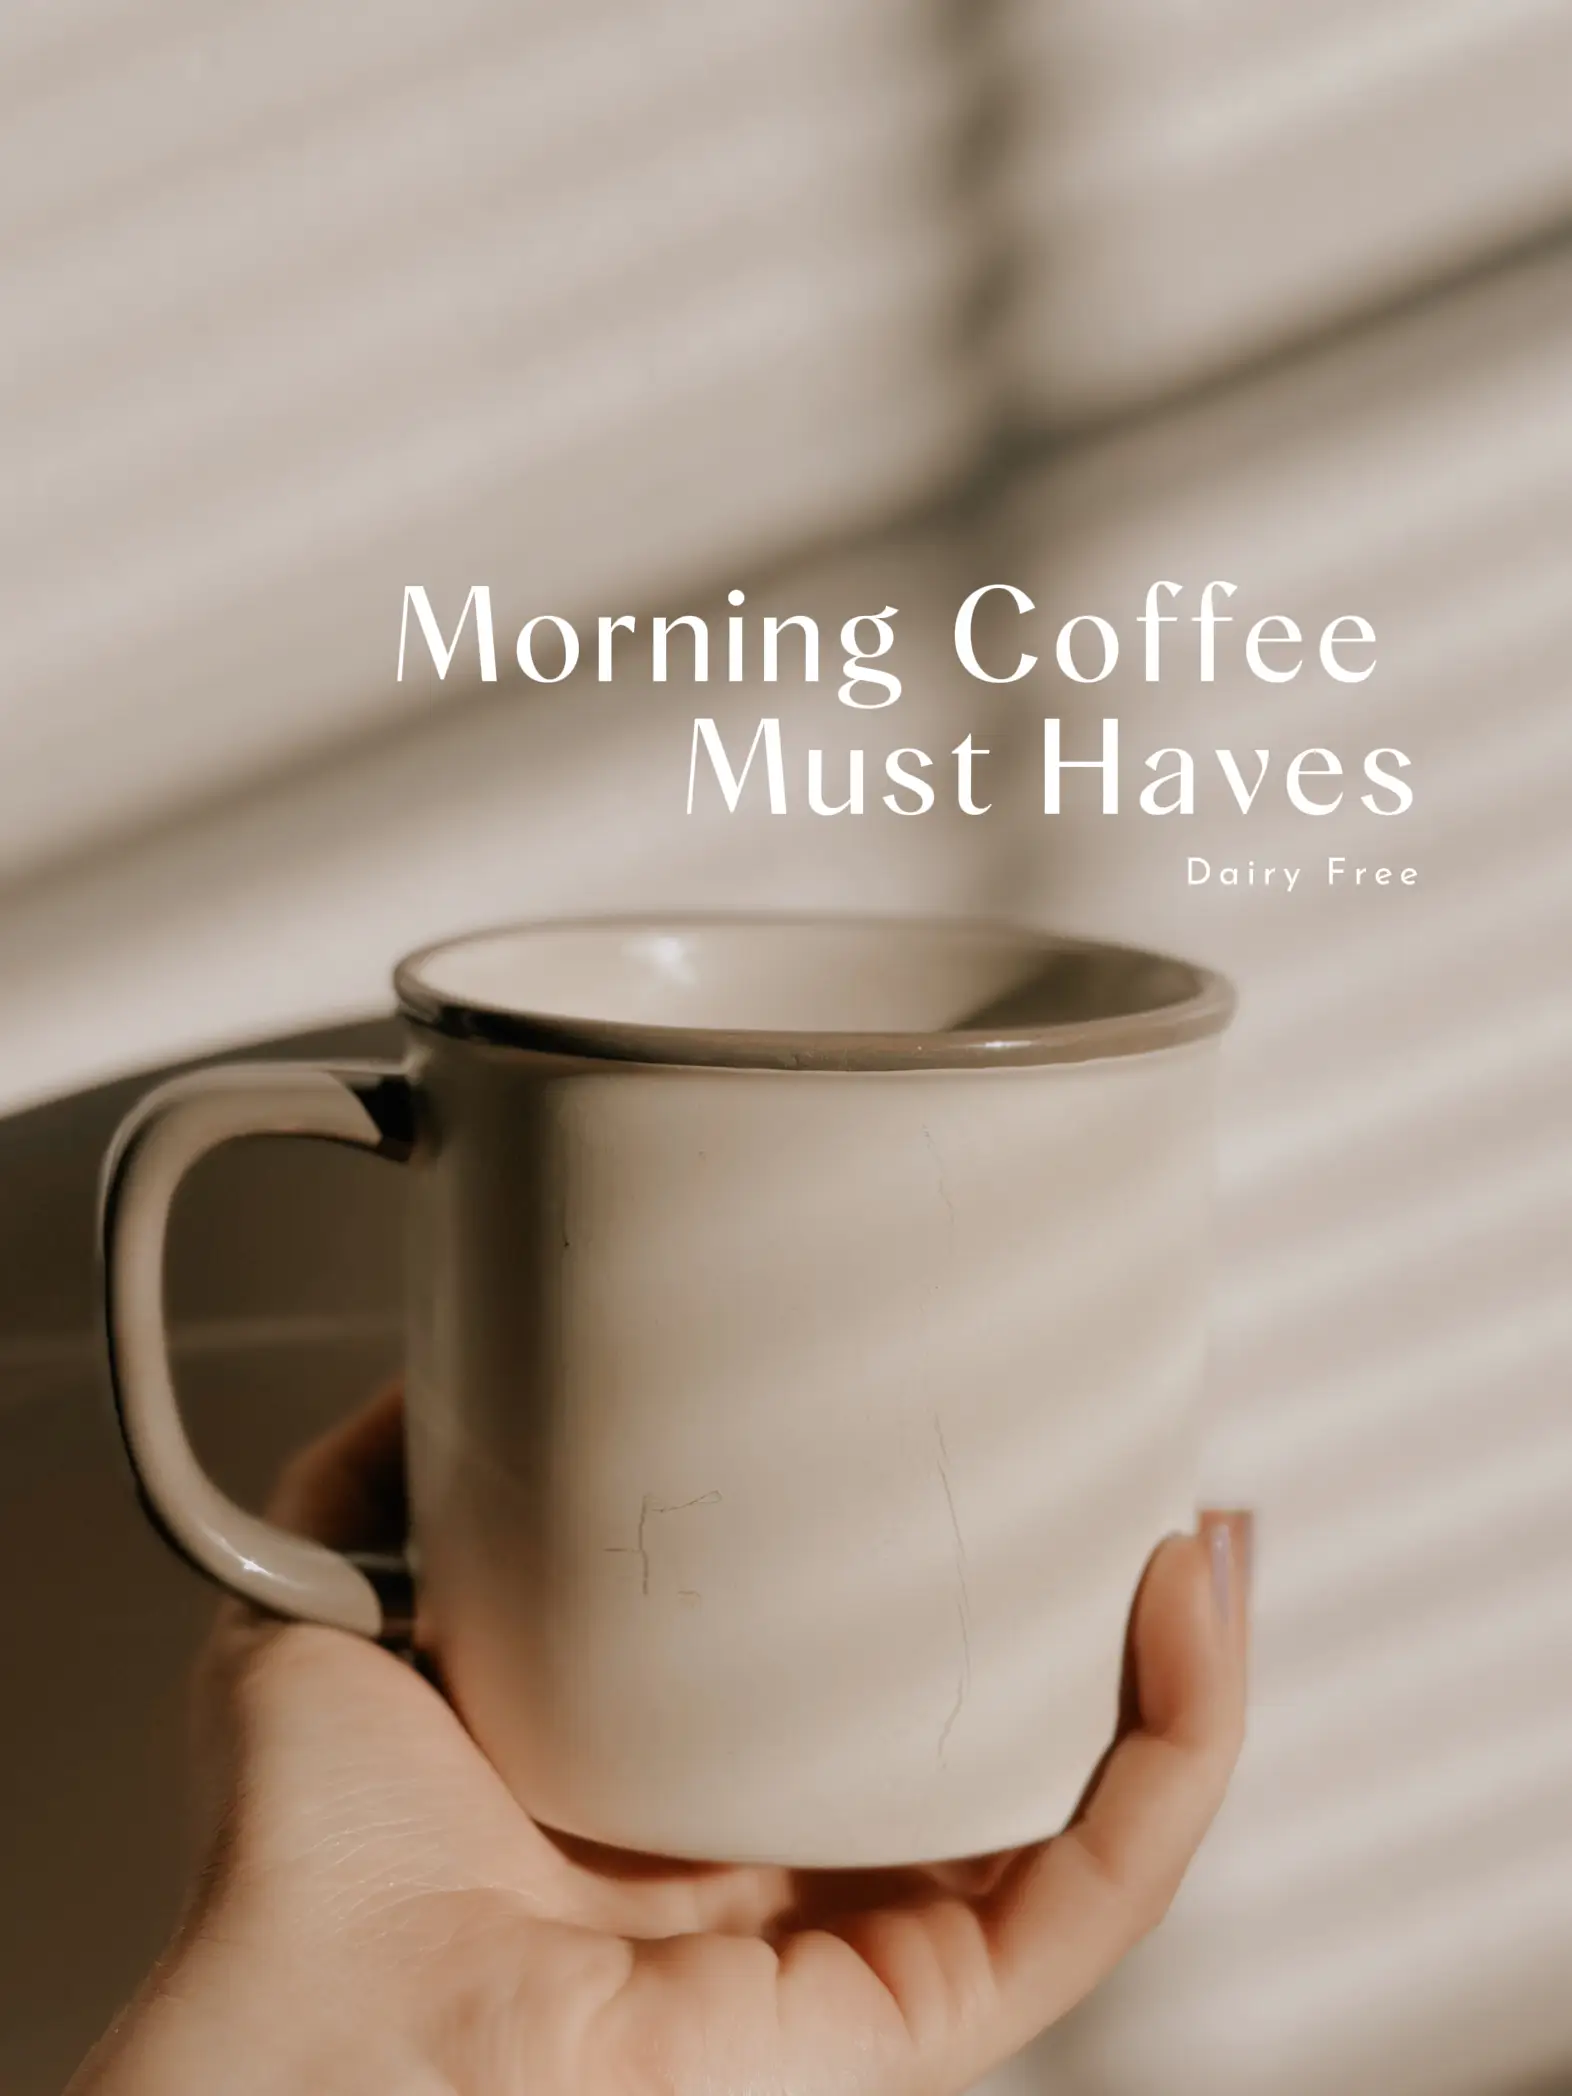 MORNING COFFEE MUST HAVES ☕️, Gallery posted by Leah Drumheller